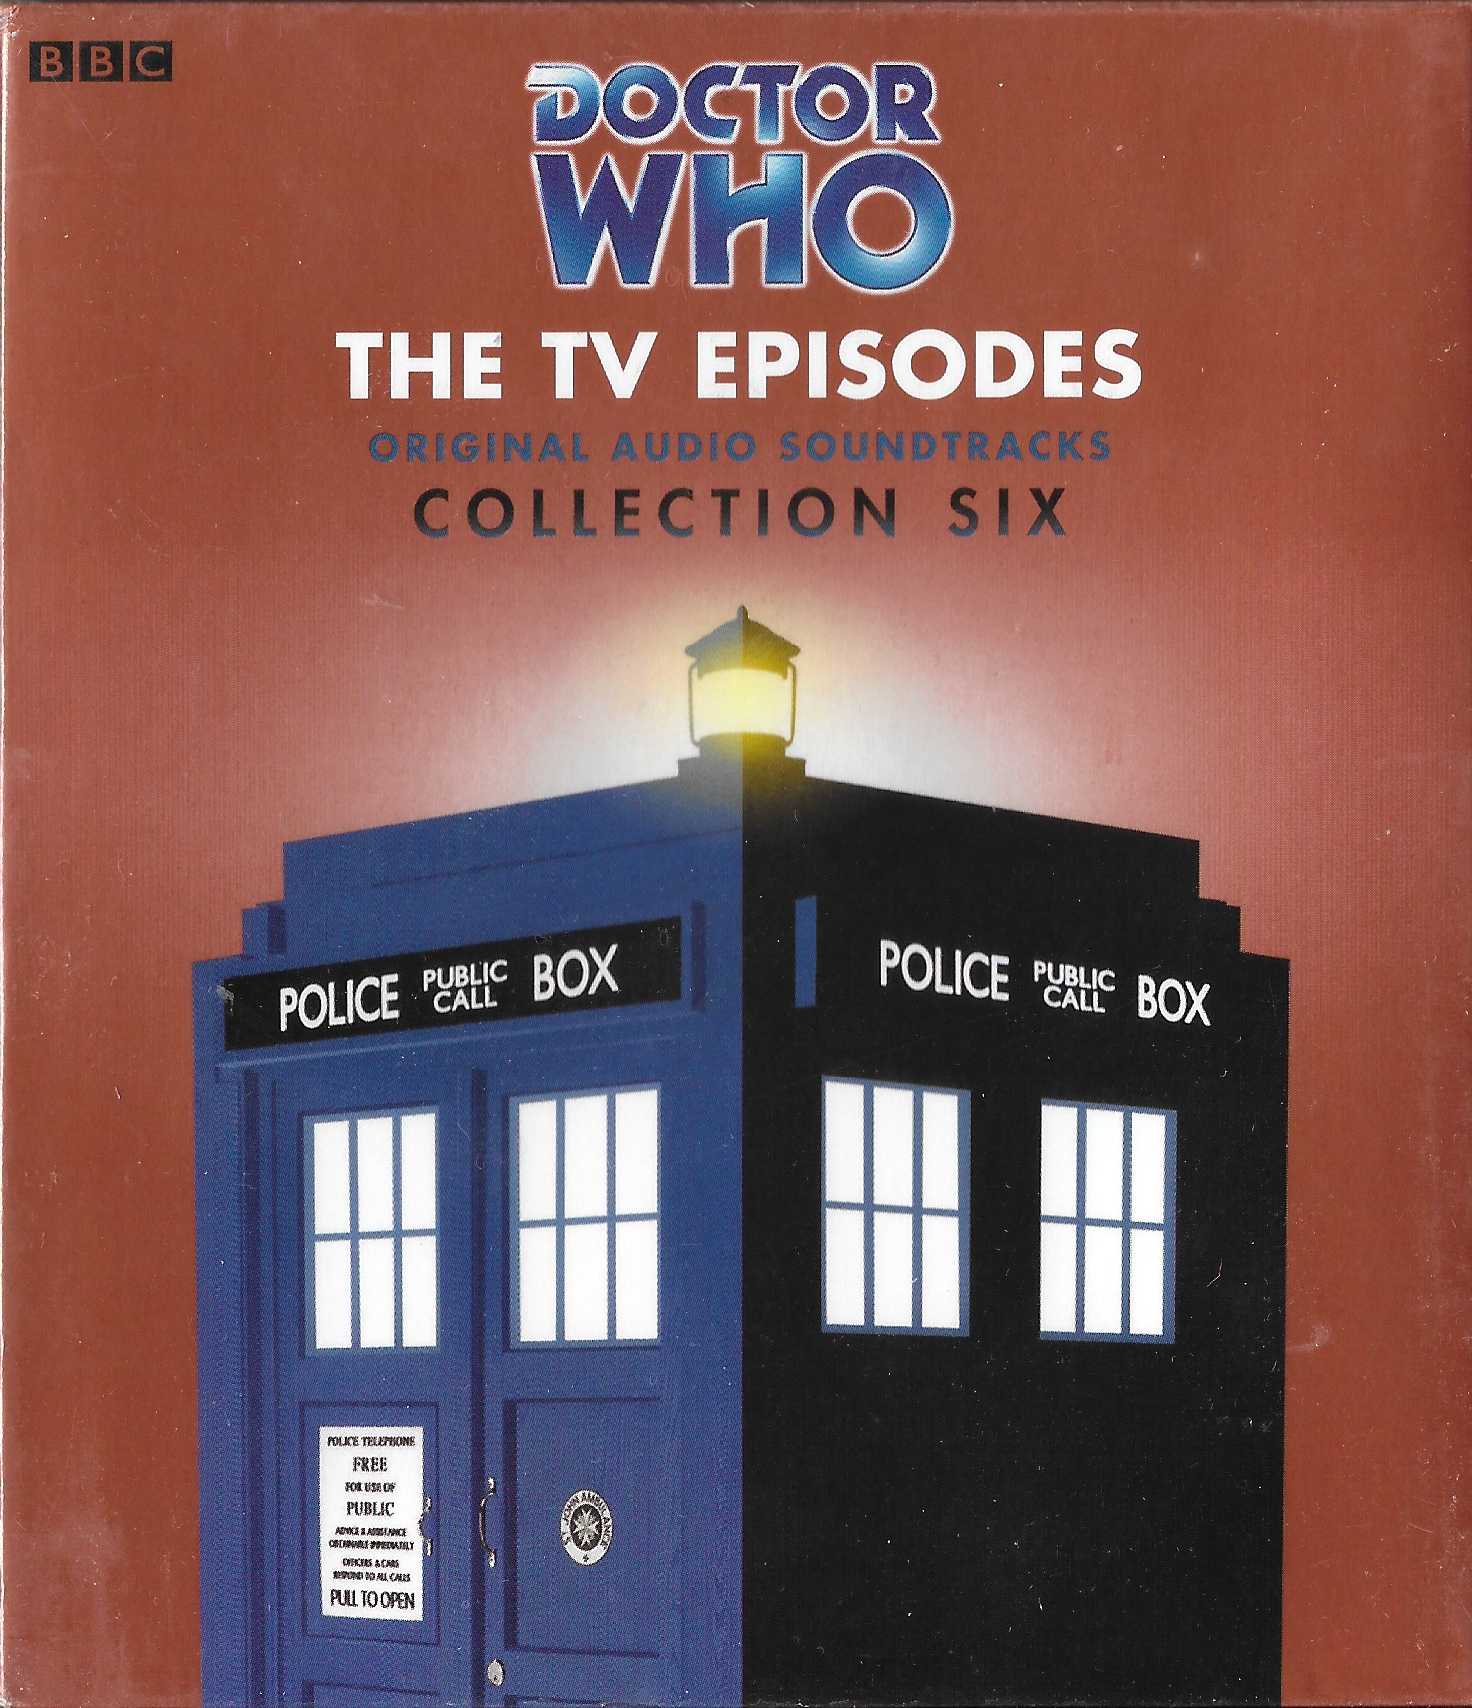 Picture of ISBN 978-1-4713-4487-9 Doctor Who - The lost TV episodes - Collection six by artist Various from the BBC cds - Records and Tapes library